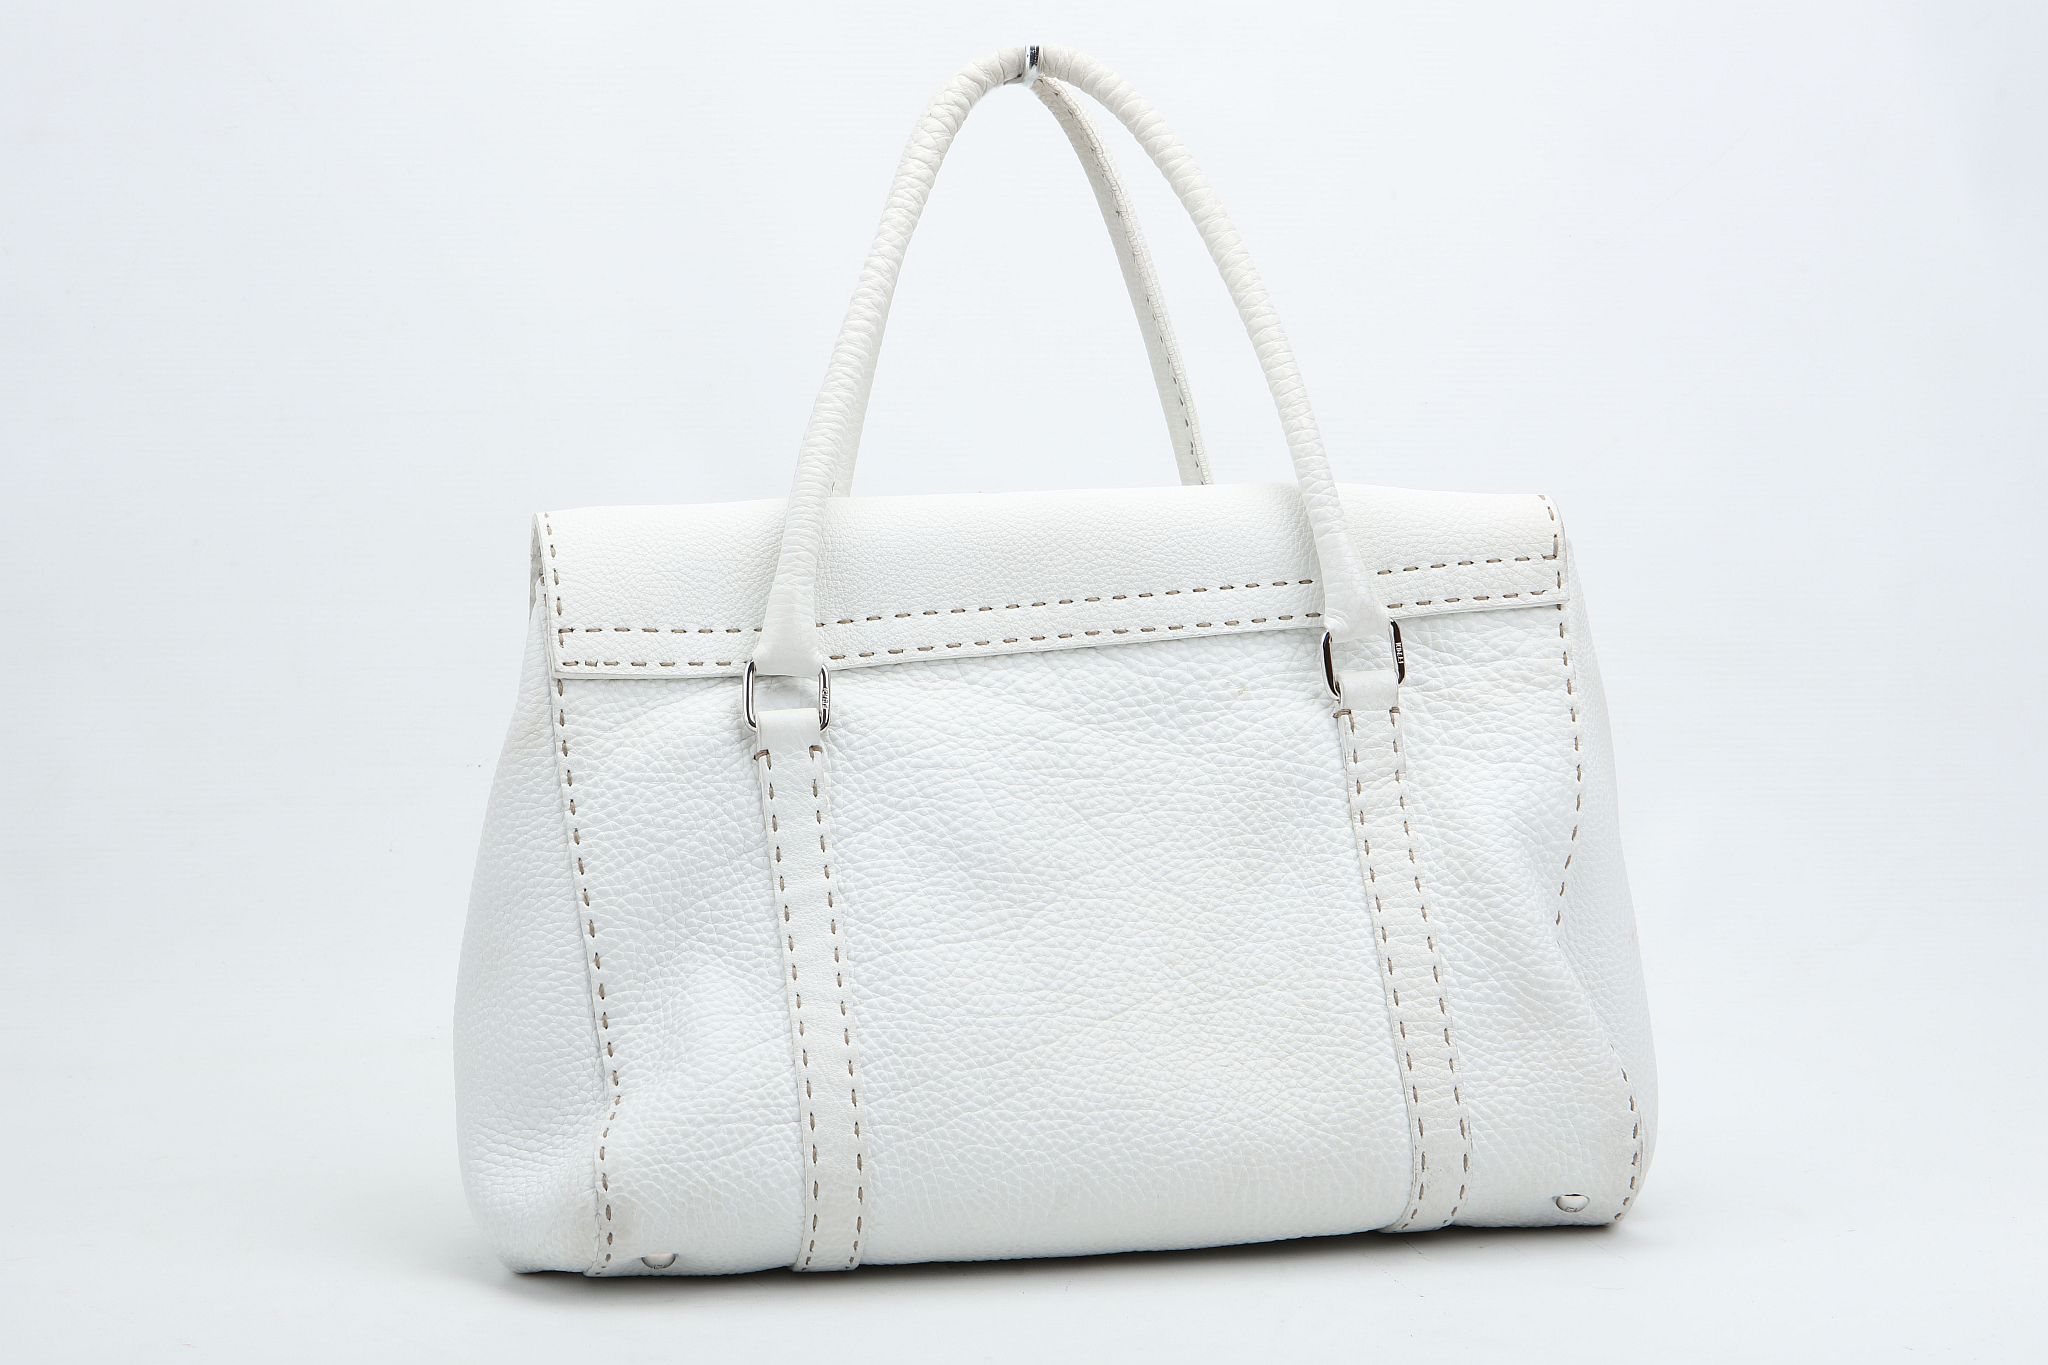 FENDI SELLERIA SHOULDER BAG, white stitched leather with silver tone hardware, 35cm wide, 30cm high, - Image 6 of 12